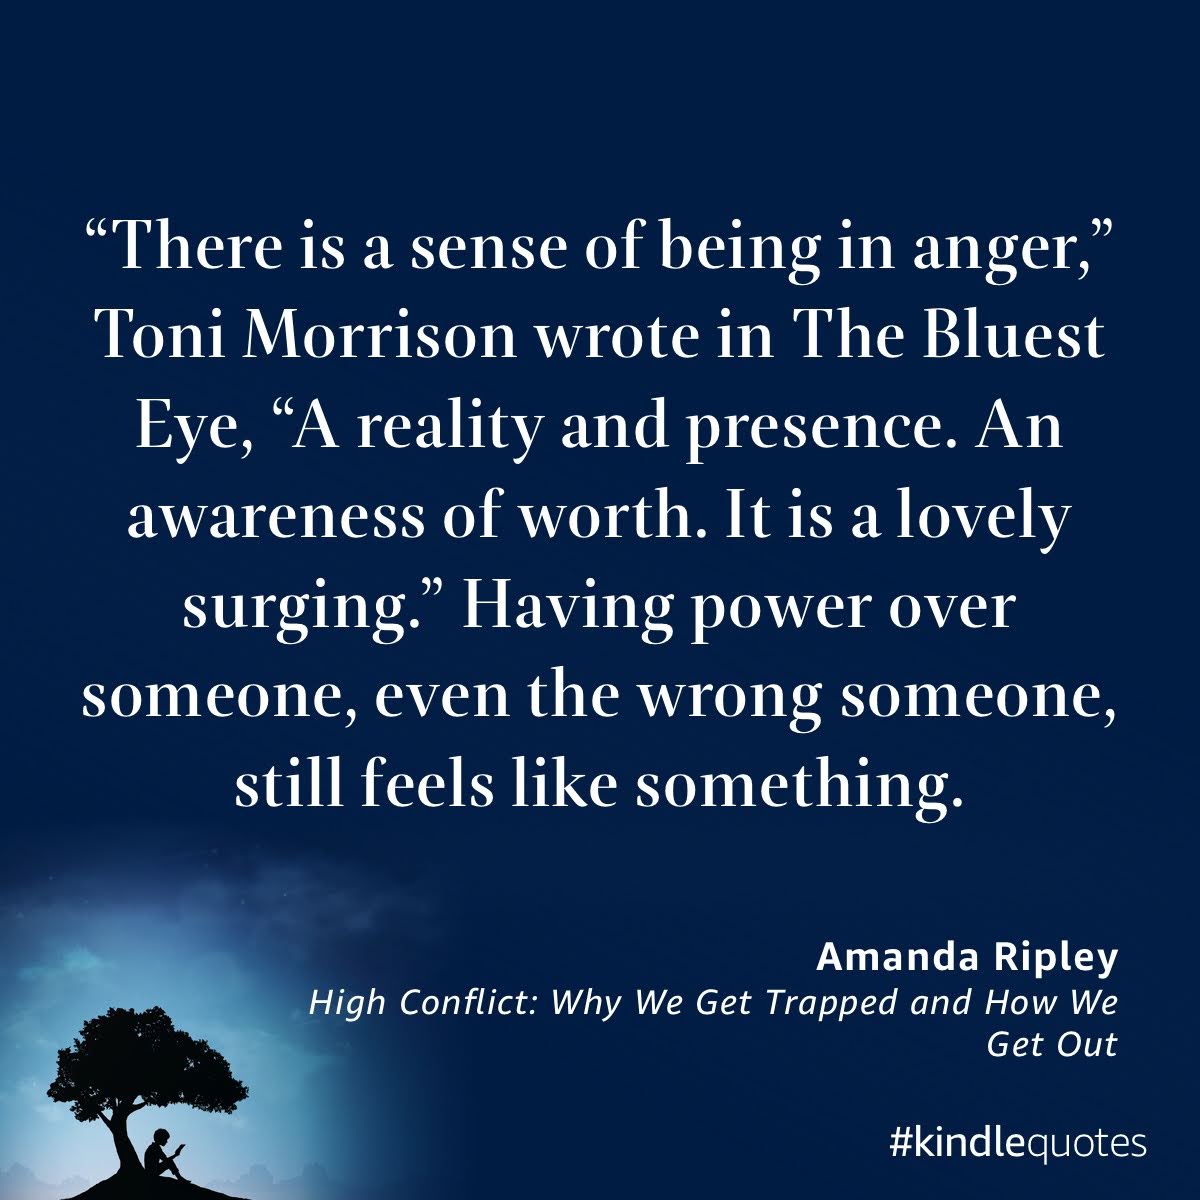 "There is a sense of being in anger," tonis Morrison wrote in The Bluest Eye, "A reality and presence. An awareness of worth. It is a lovely surging." Having power over someone, even the wrong someone, still feels like something. Amanda Ripley High Conflict: Why we Get trapped and How We Get Out